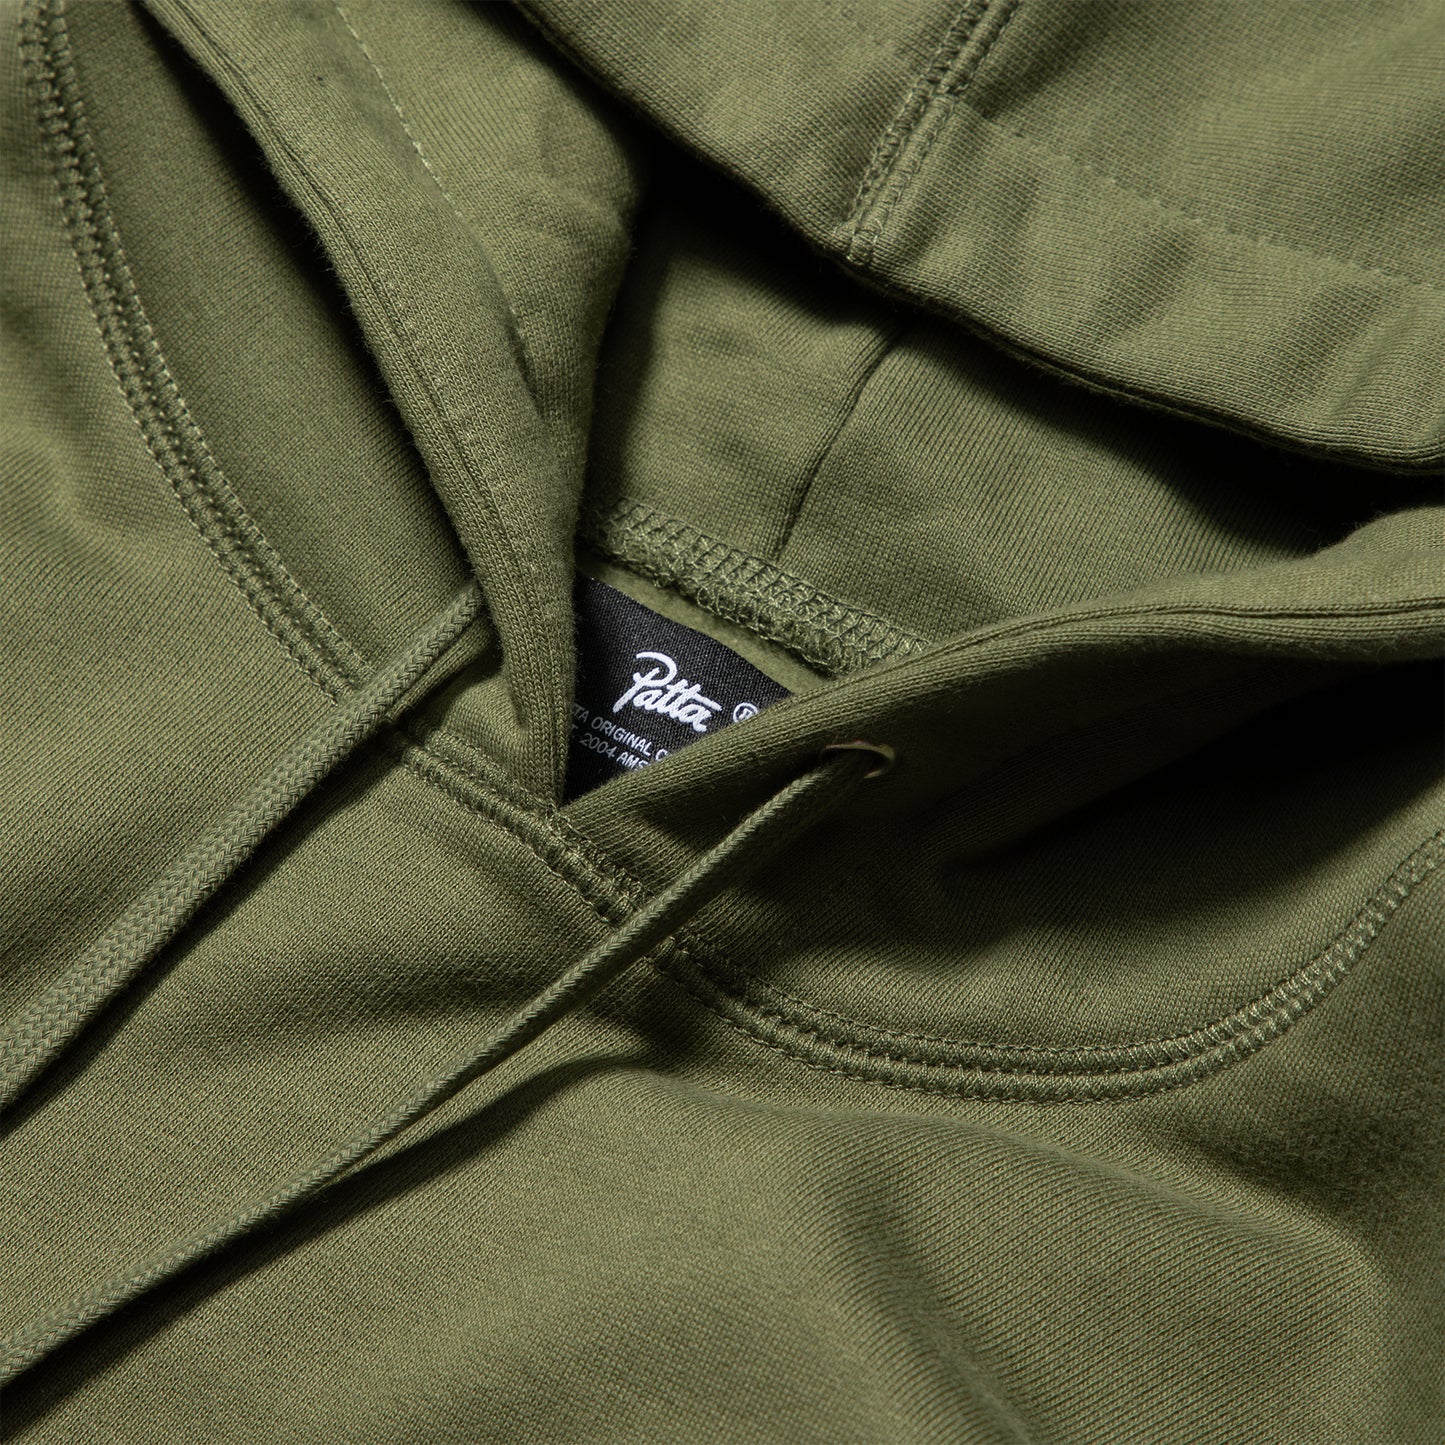 Patta Wild Hooded Sweater (Olive)